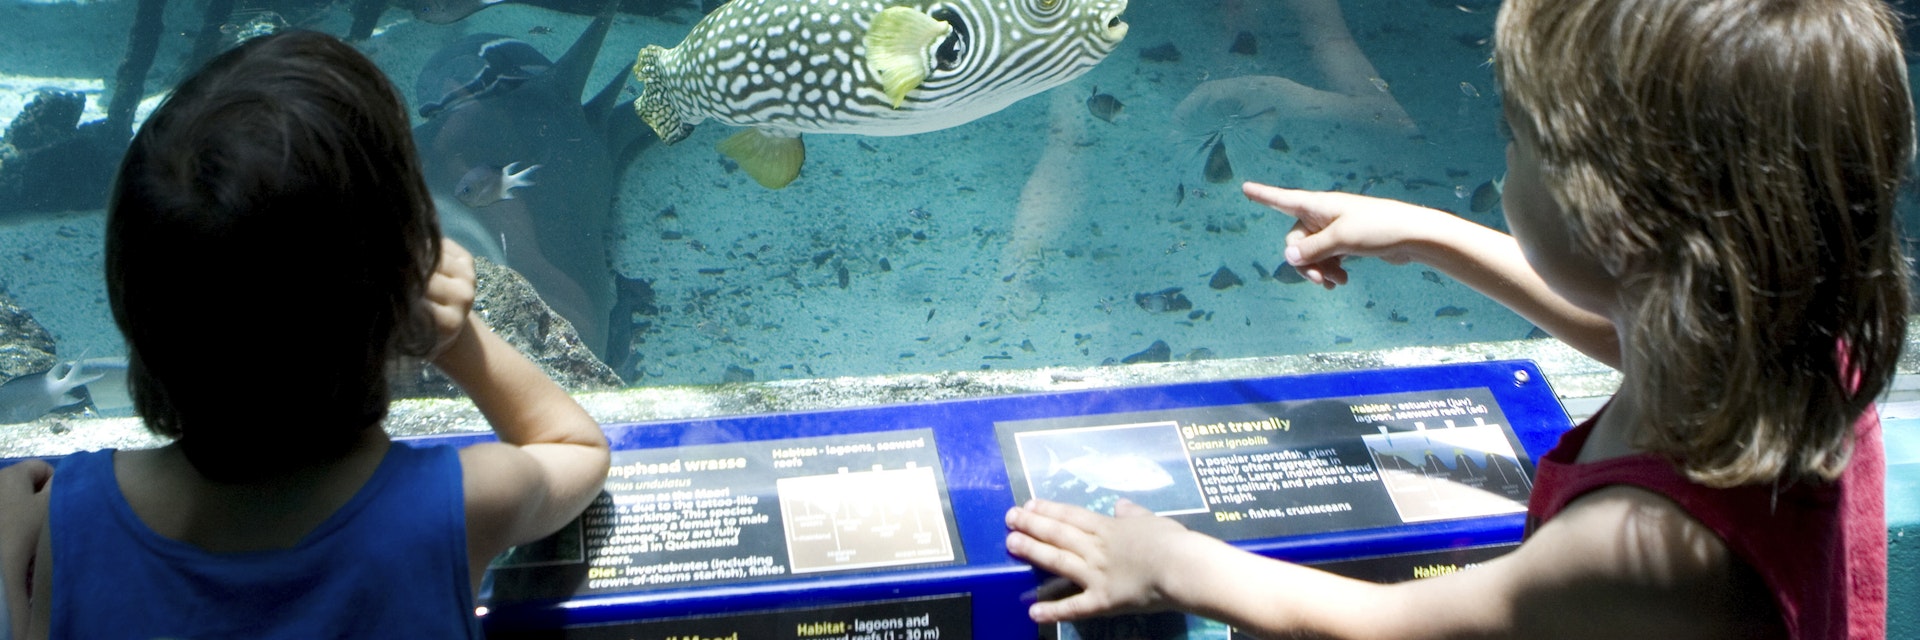 Two girls looking at fishes at the Reef HQ aquarium, Townsville, Queensland, Australia